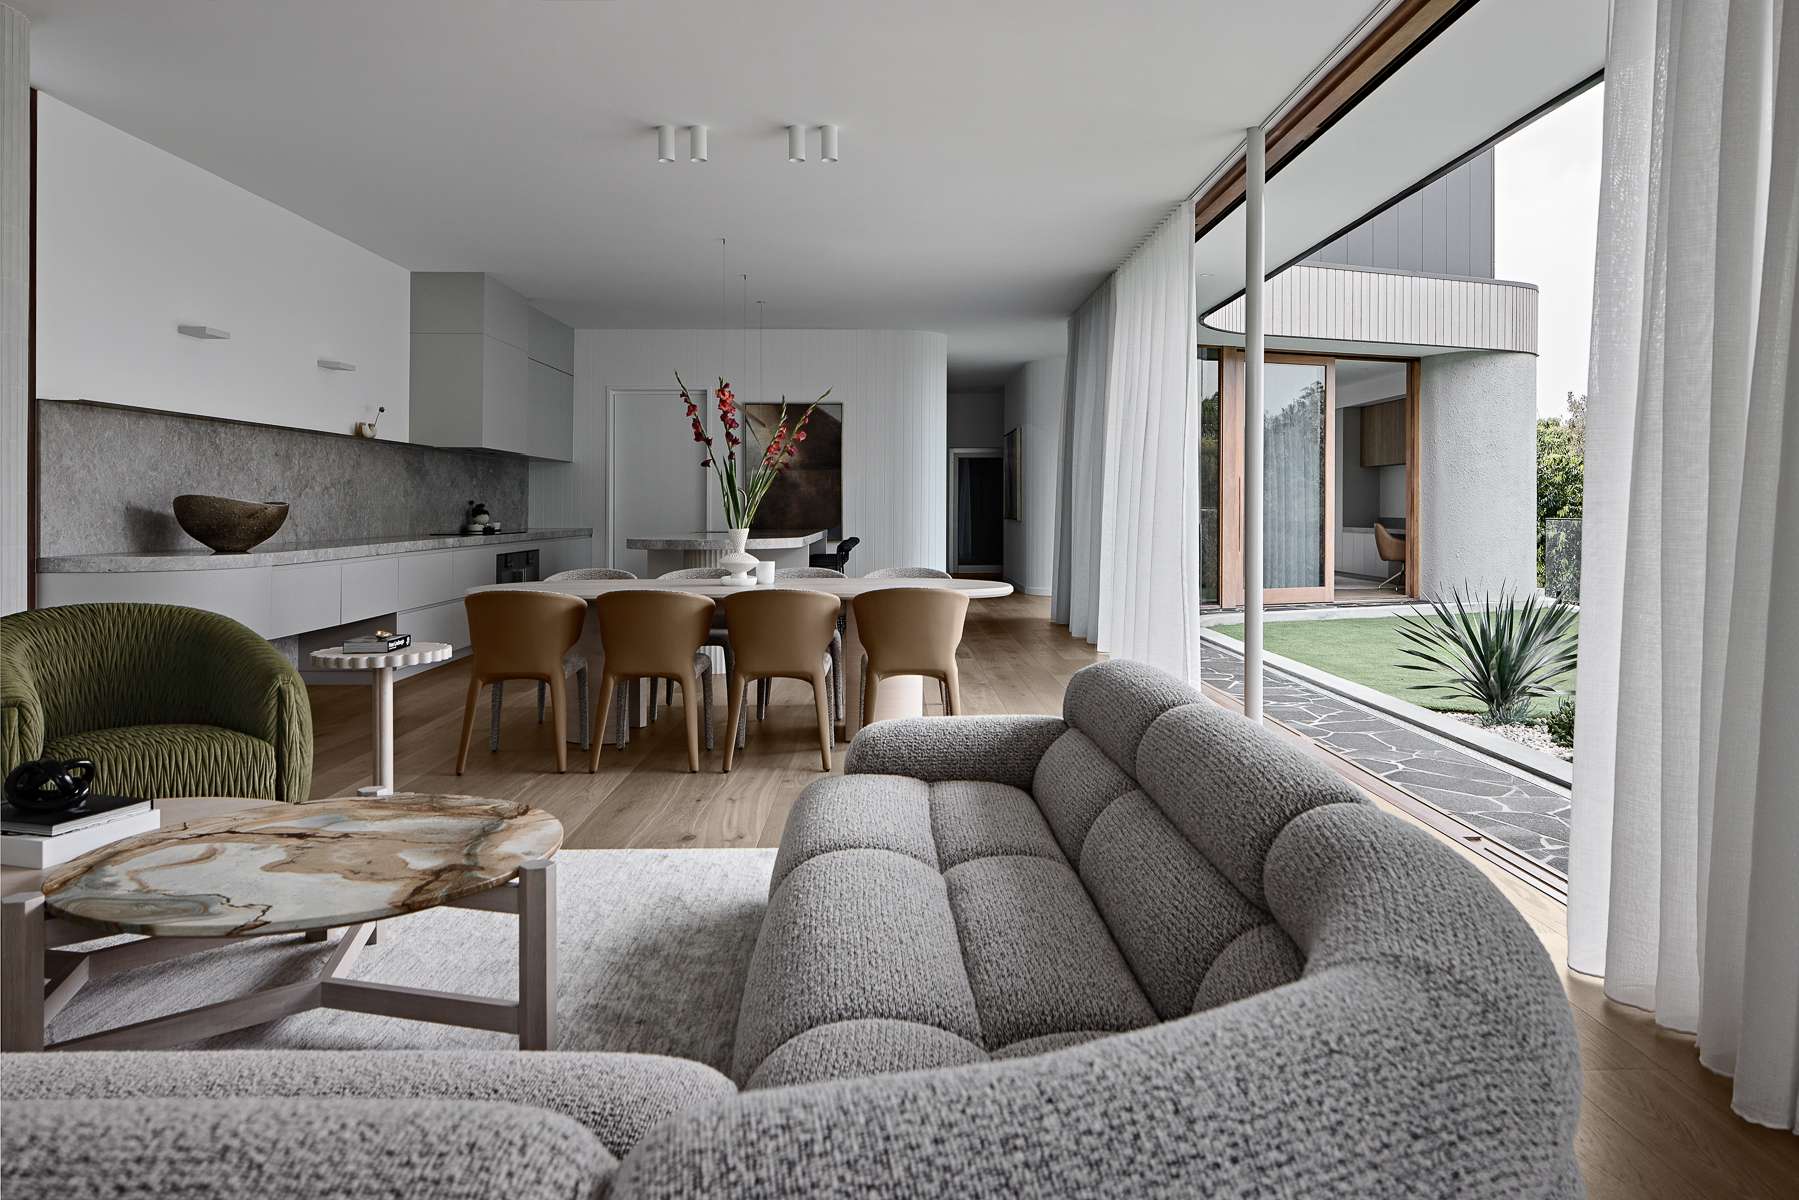 Amiri Courtyard House by Kelder Architects showing interior view of living and dining areas